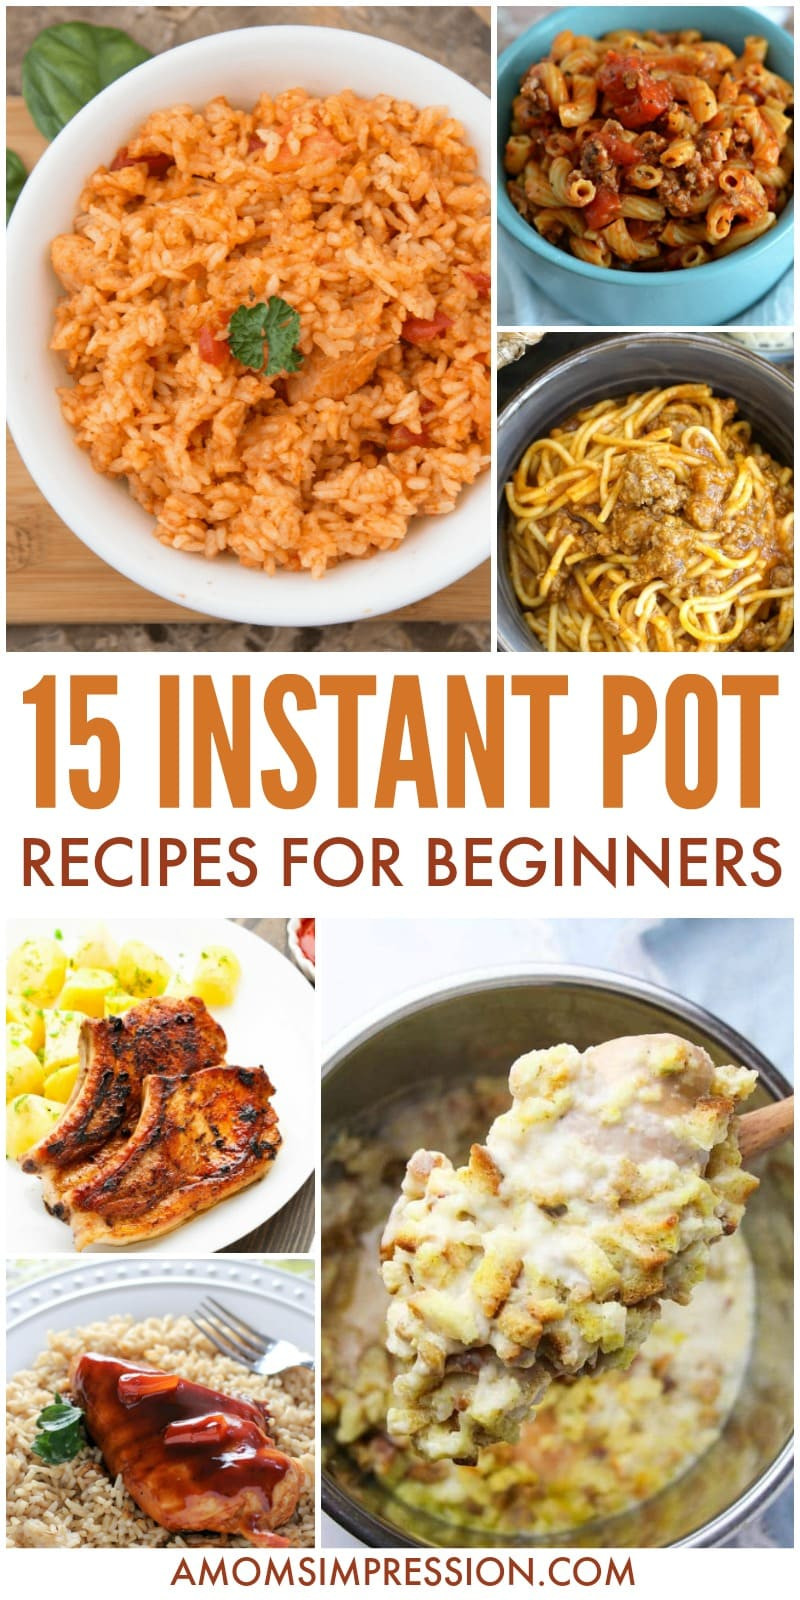 Instant Pot Simple Recipes
 15 Easy Instant Pot Recipes for Beginners A Mom s Impression